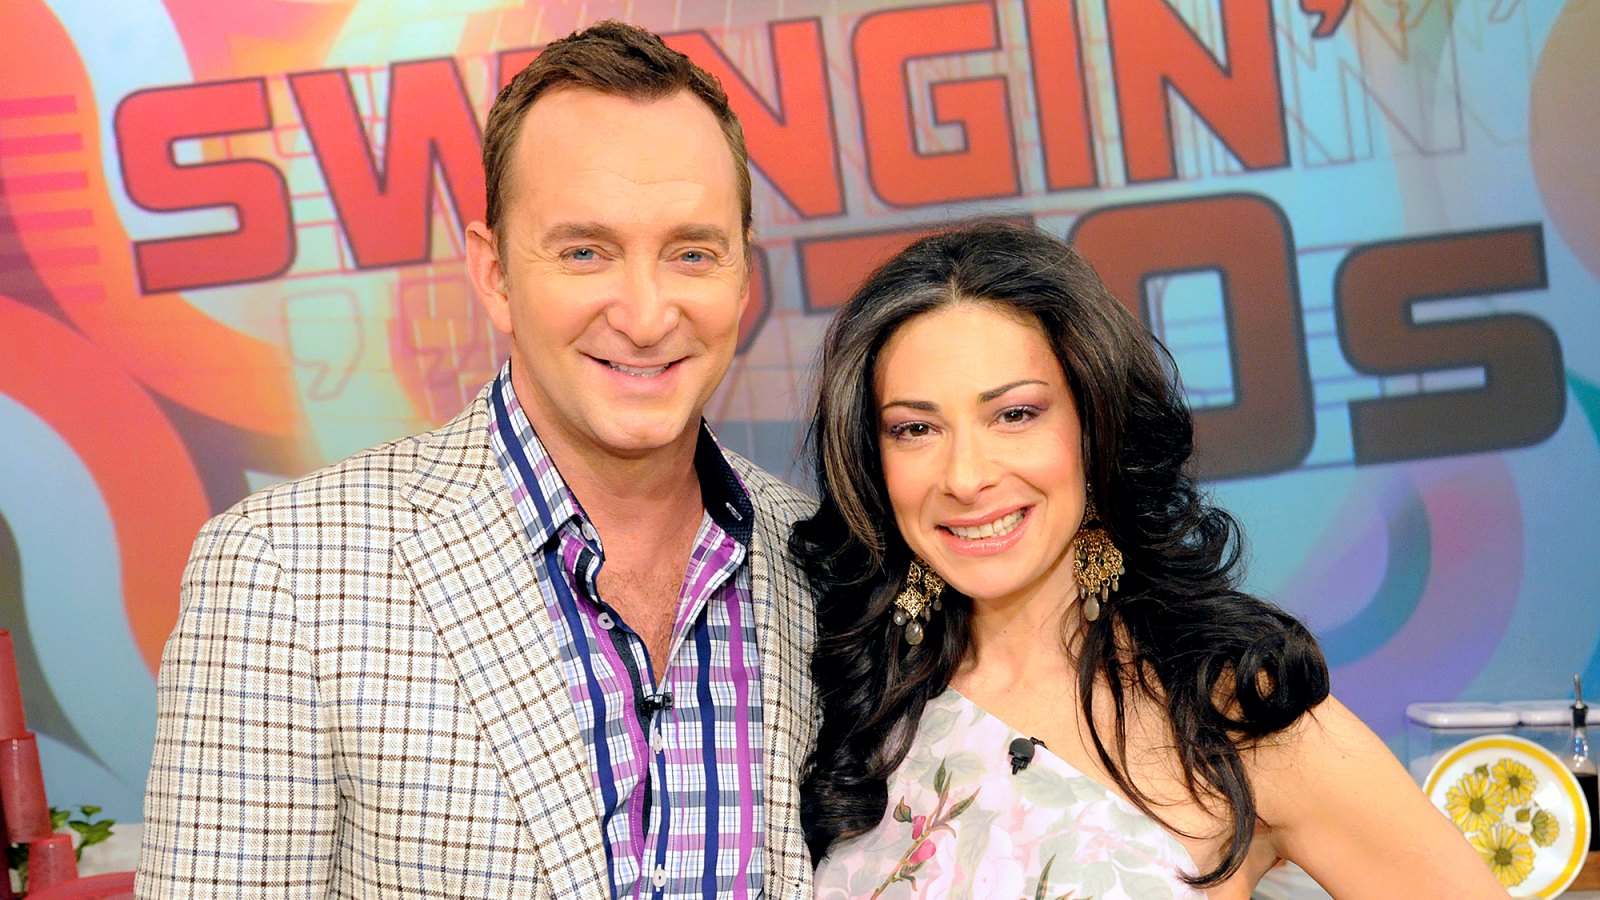 Clinton Kelly and Stacy London on ‘The Chew‘